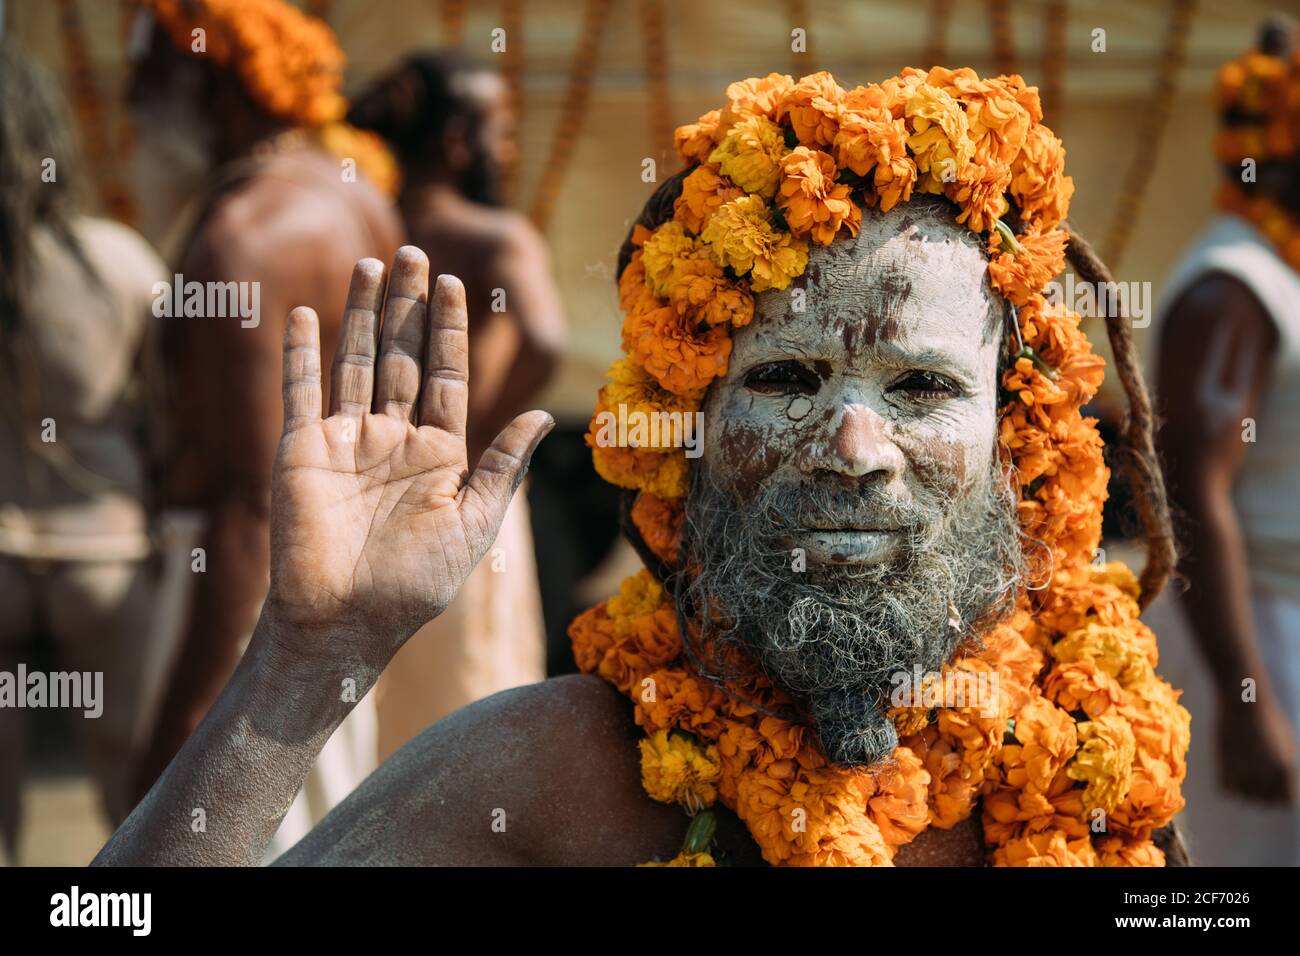 Allahabad city, India - FEBRUARY, 2018: Hindu sadhu with face painted with ash and saffron flowers around head and neck standing on street and waving hand at camera during Prayag Kumbh Mela Festival Stock Photo